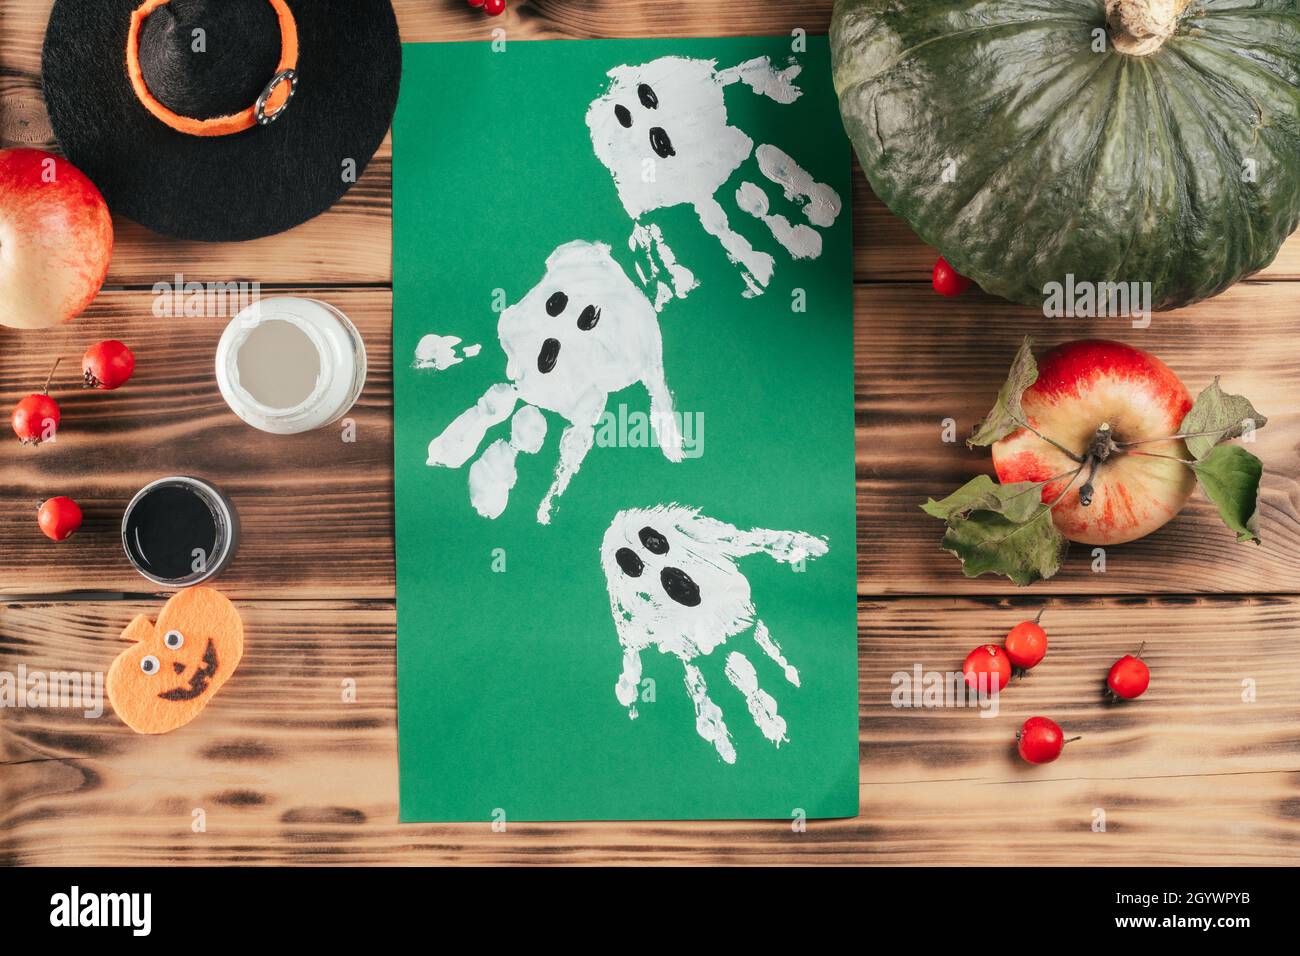 Step-by-step Halloween tutorial ghosts child's handprint. Step 9: Finished drawing of ghosts made with children's handprints. Top view Stock Photo